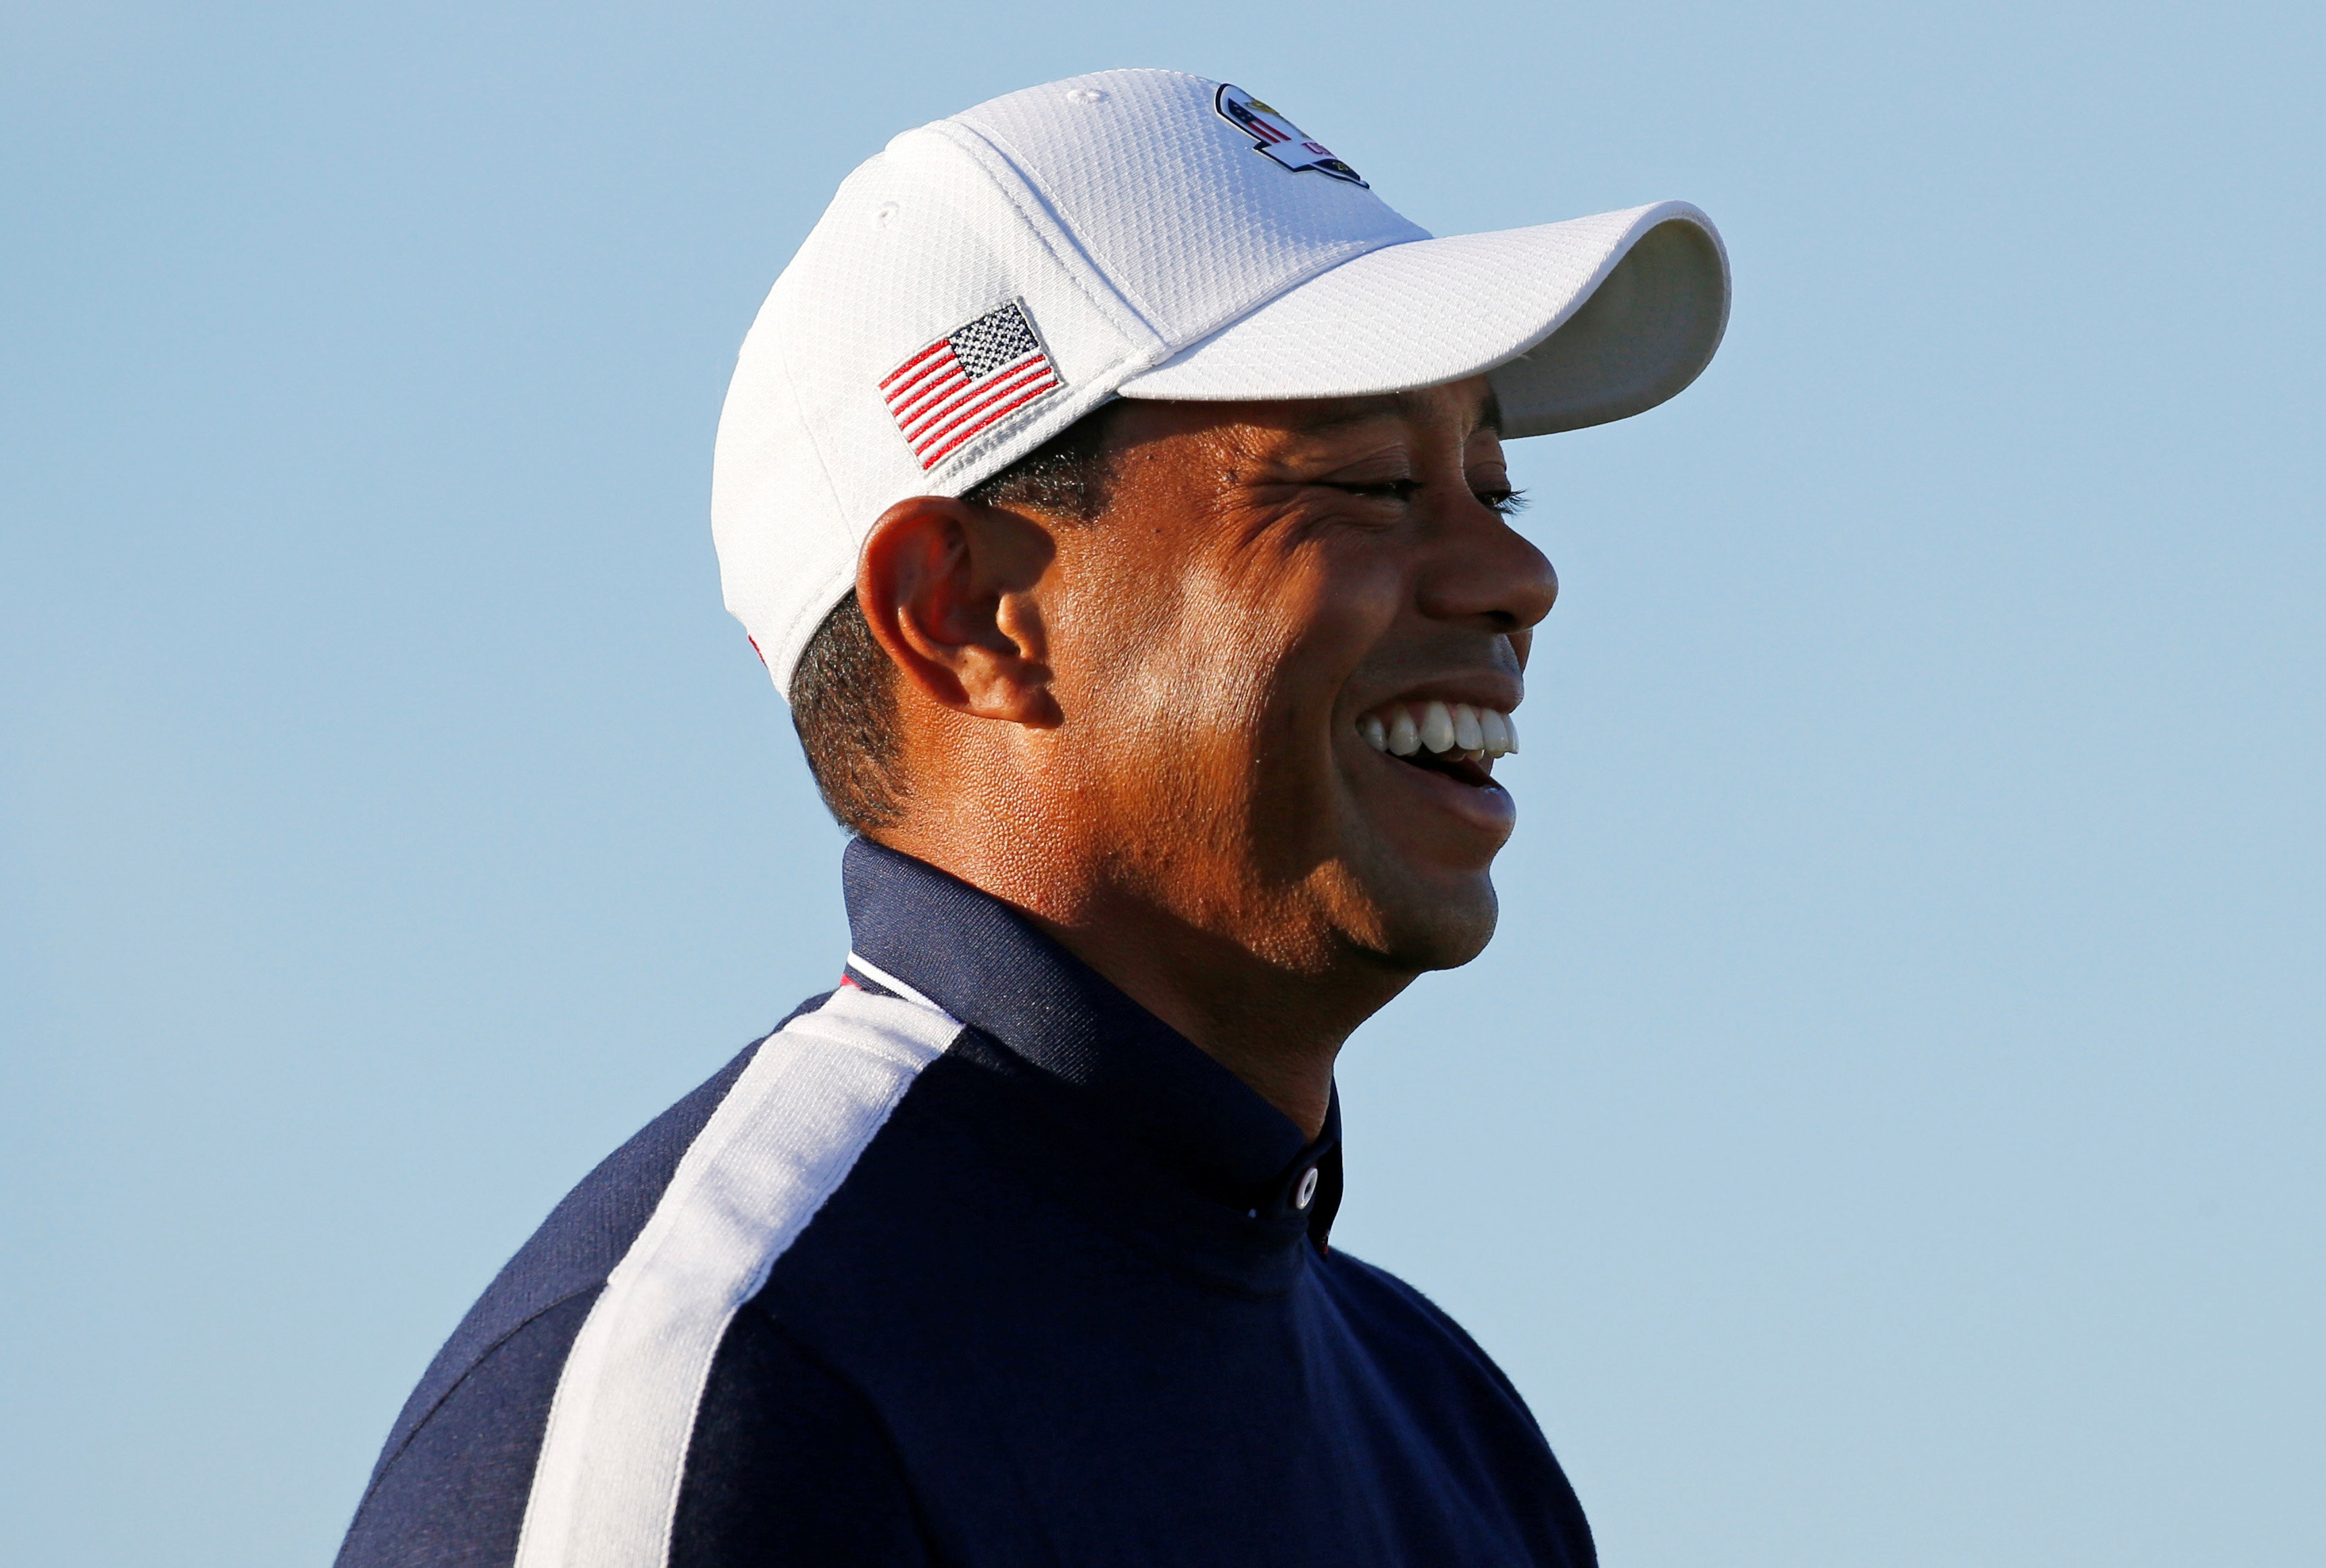 Team USA’s Tiger Woods in action during practise at Le Golf National. Photo: Reuters